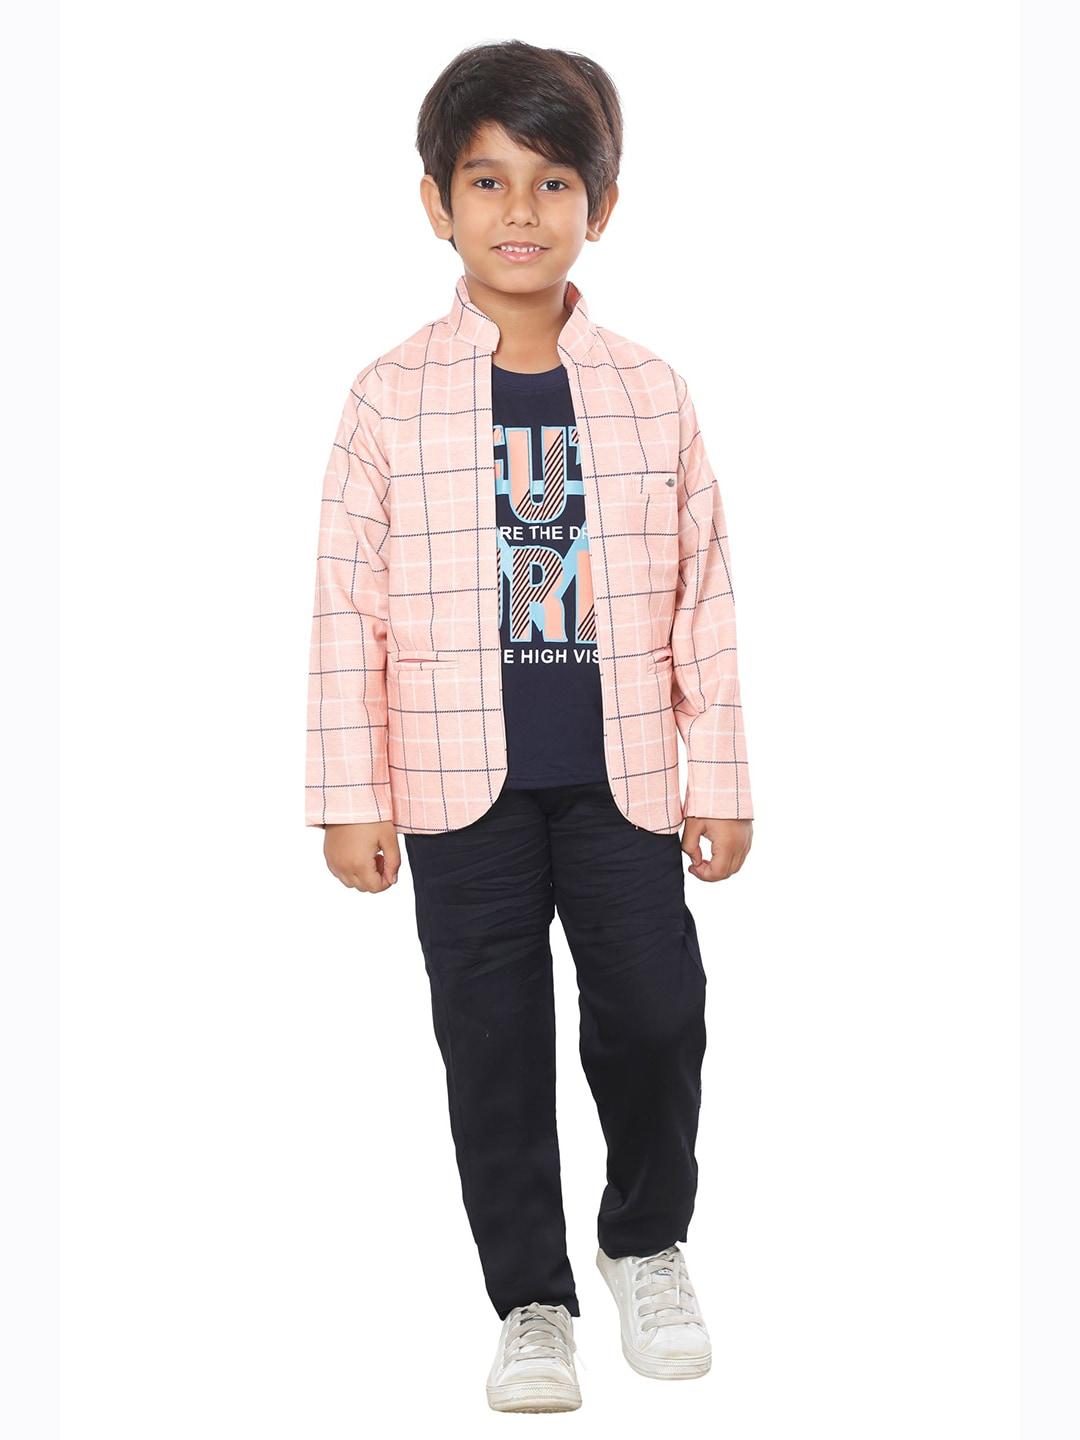 dkgf fashion boys pink & black checked coat with trousers